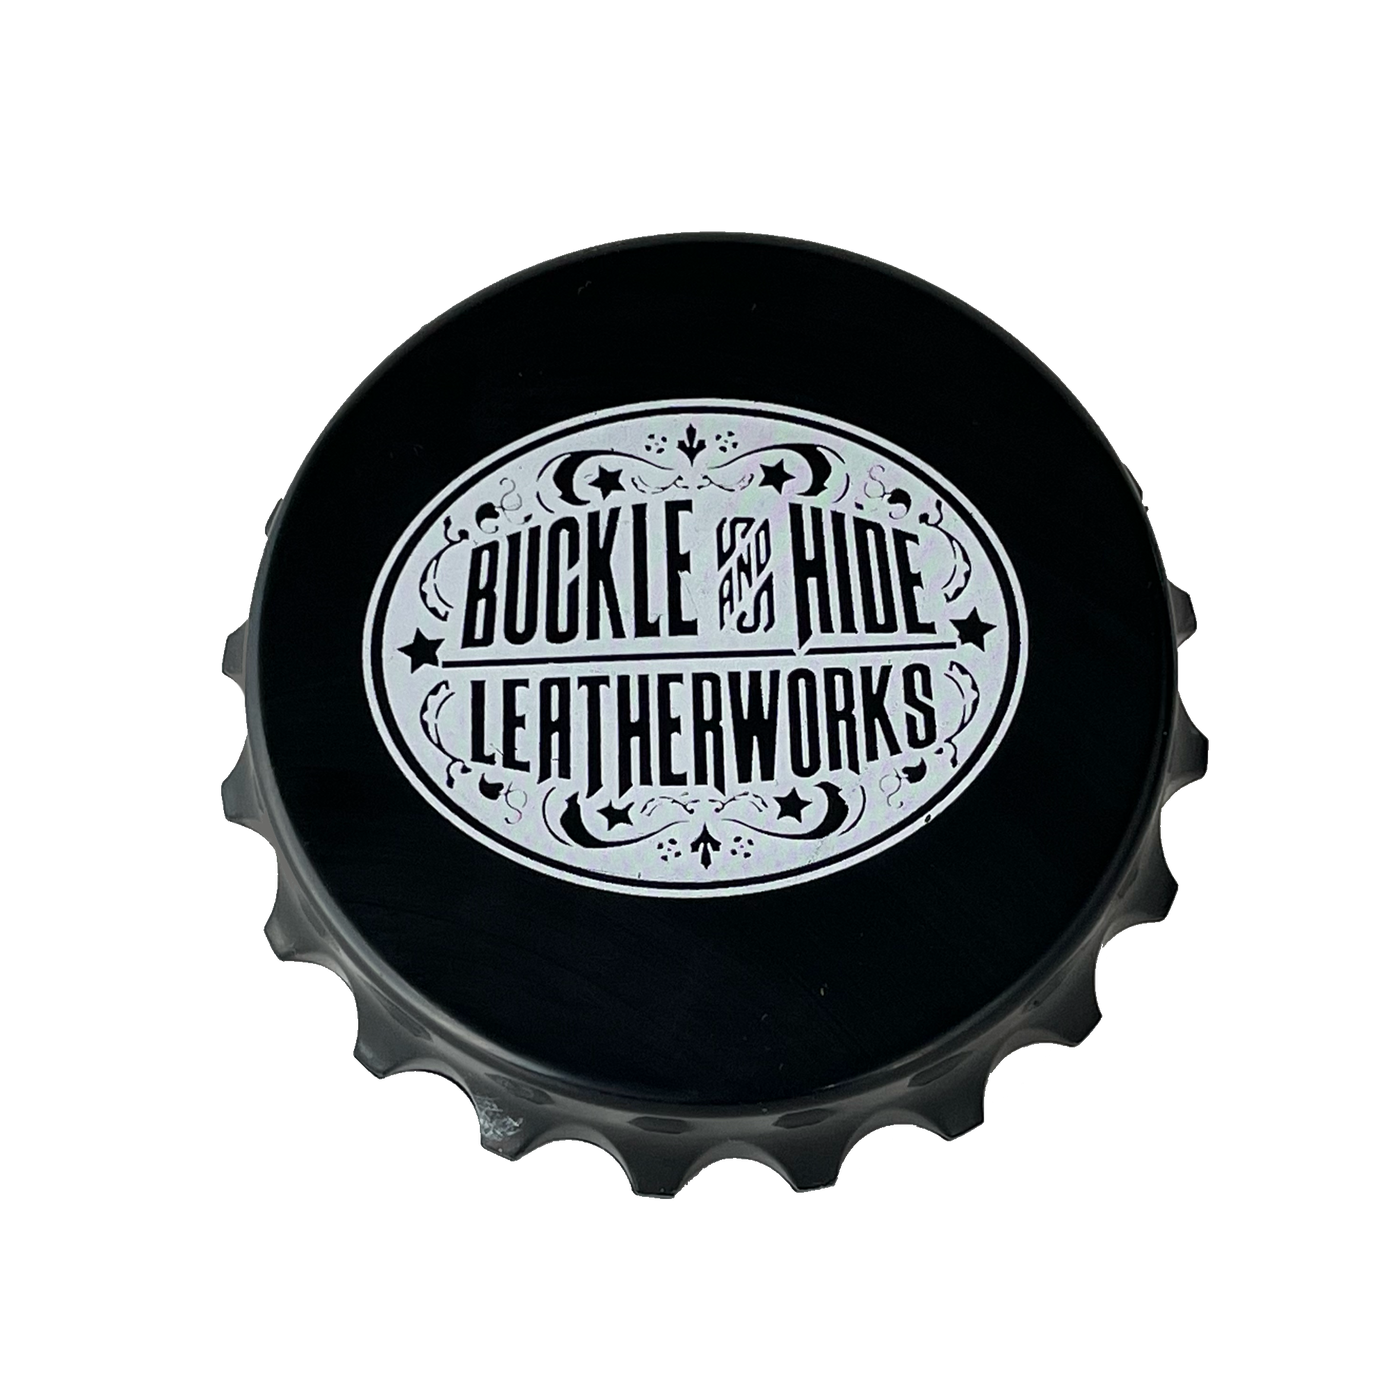 Black "Bottle Cap shaped" Magnetic bottle opener with white Buckle and Hide Oval logo. Available online or in our shop just outside Nashville in Smyrna, TN.